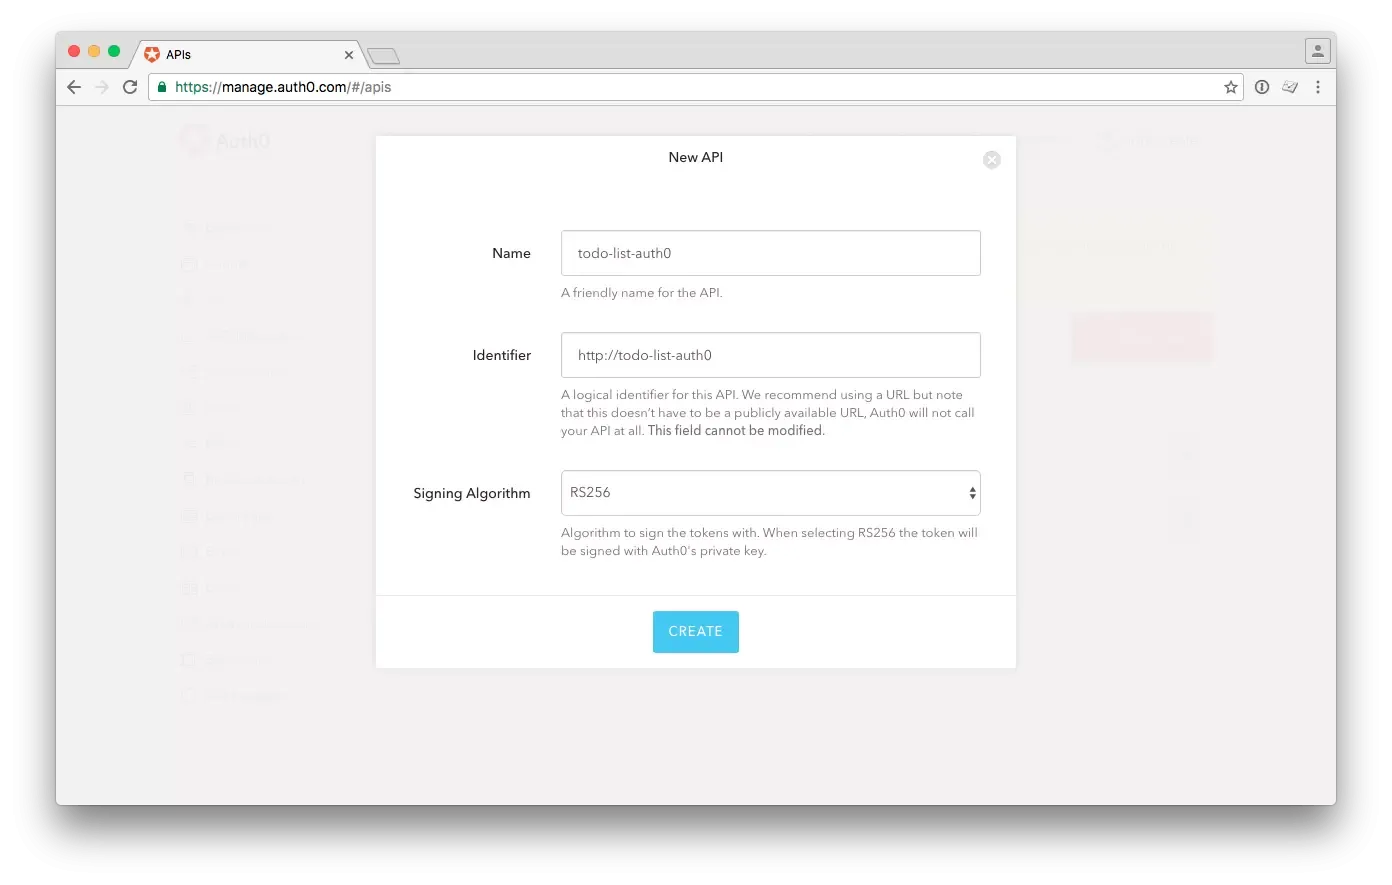 Auth0 website with the fields to create the API.